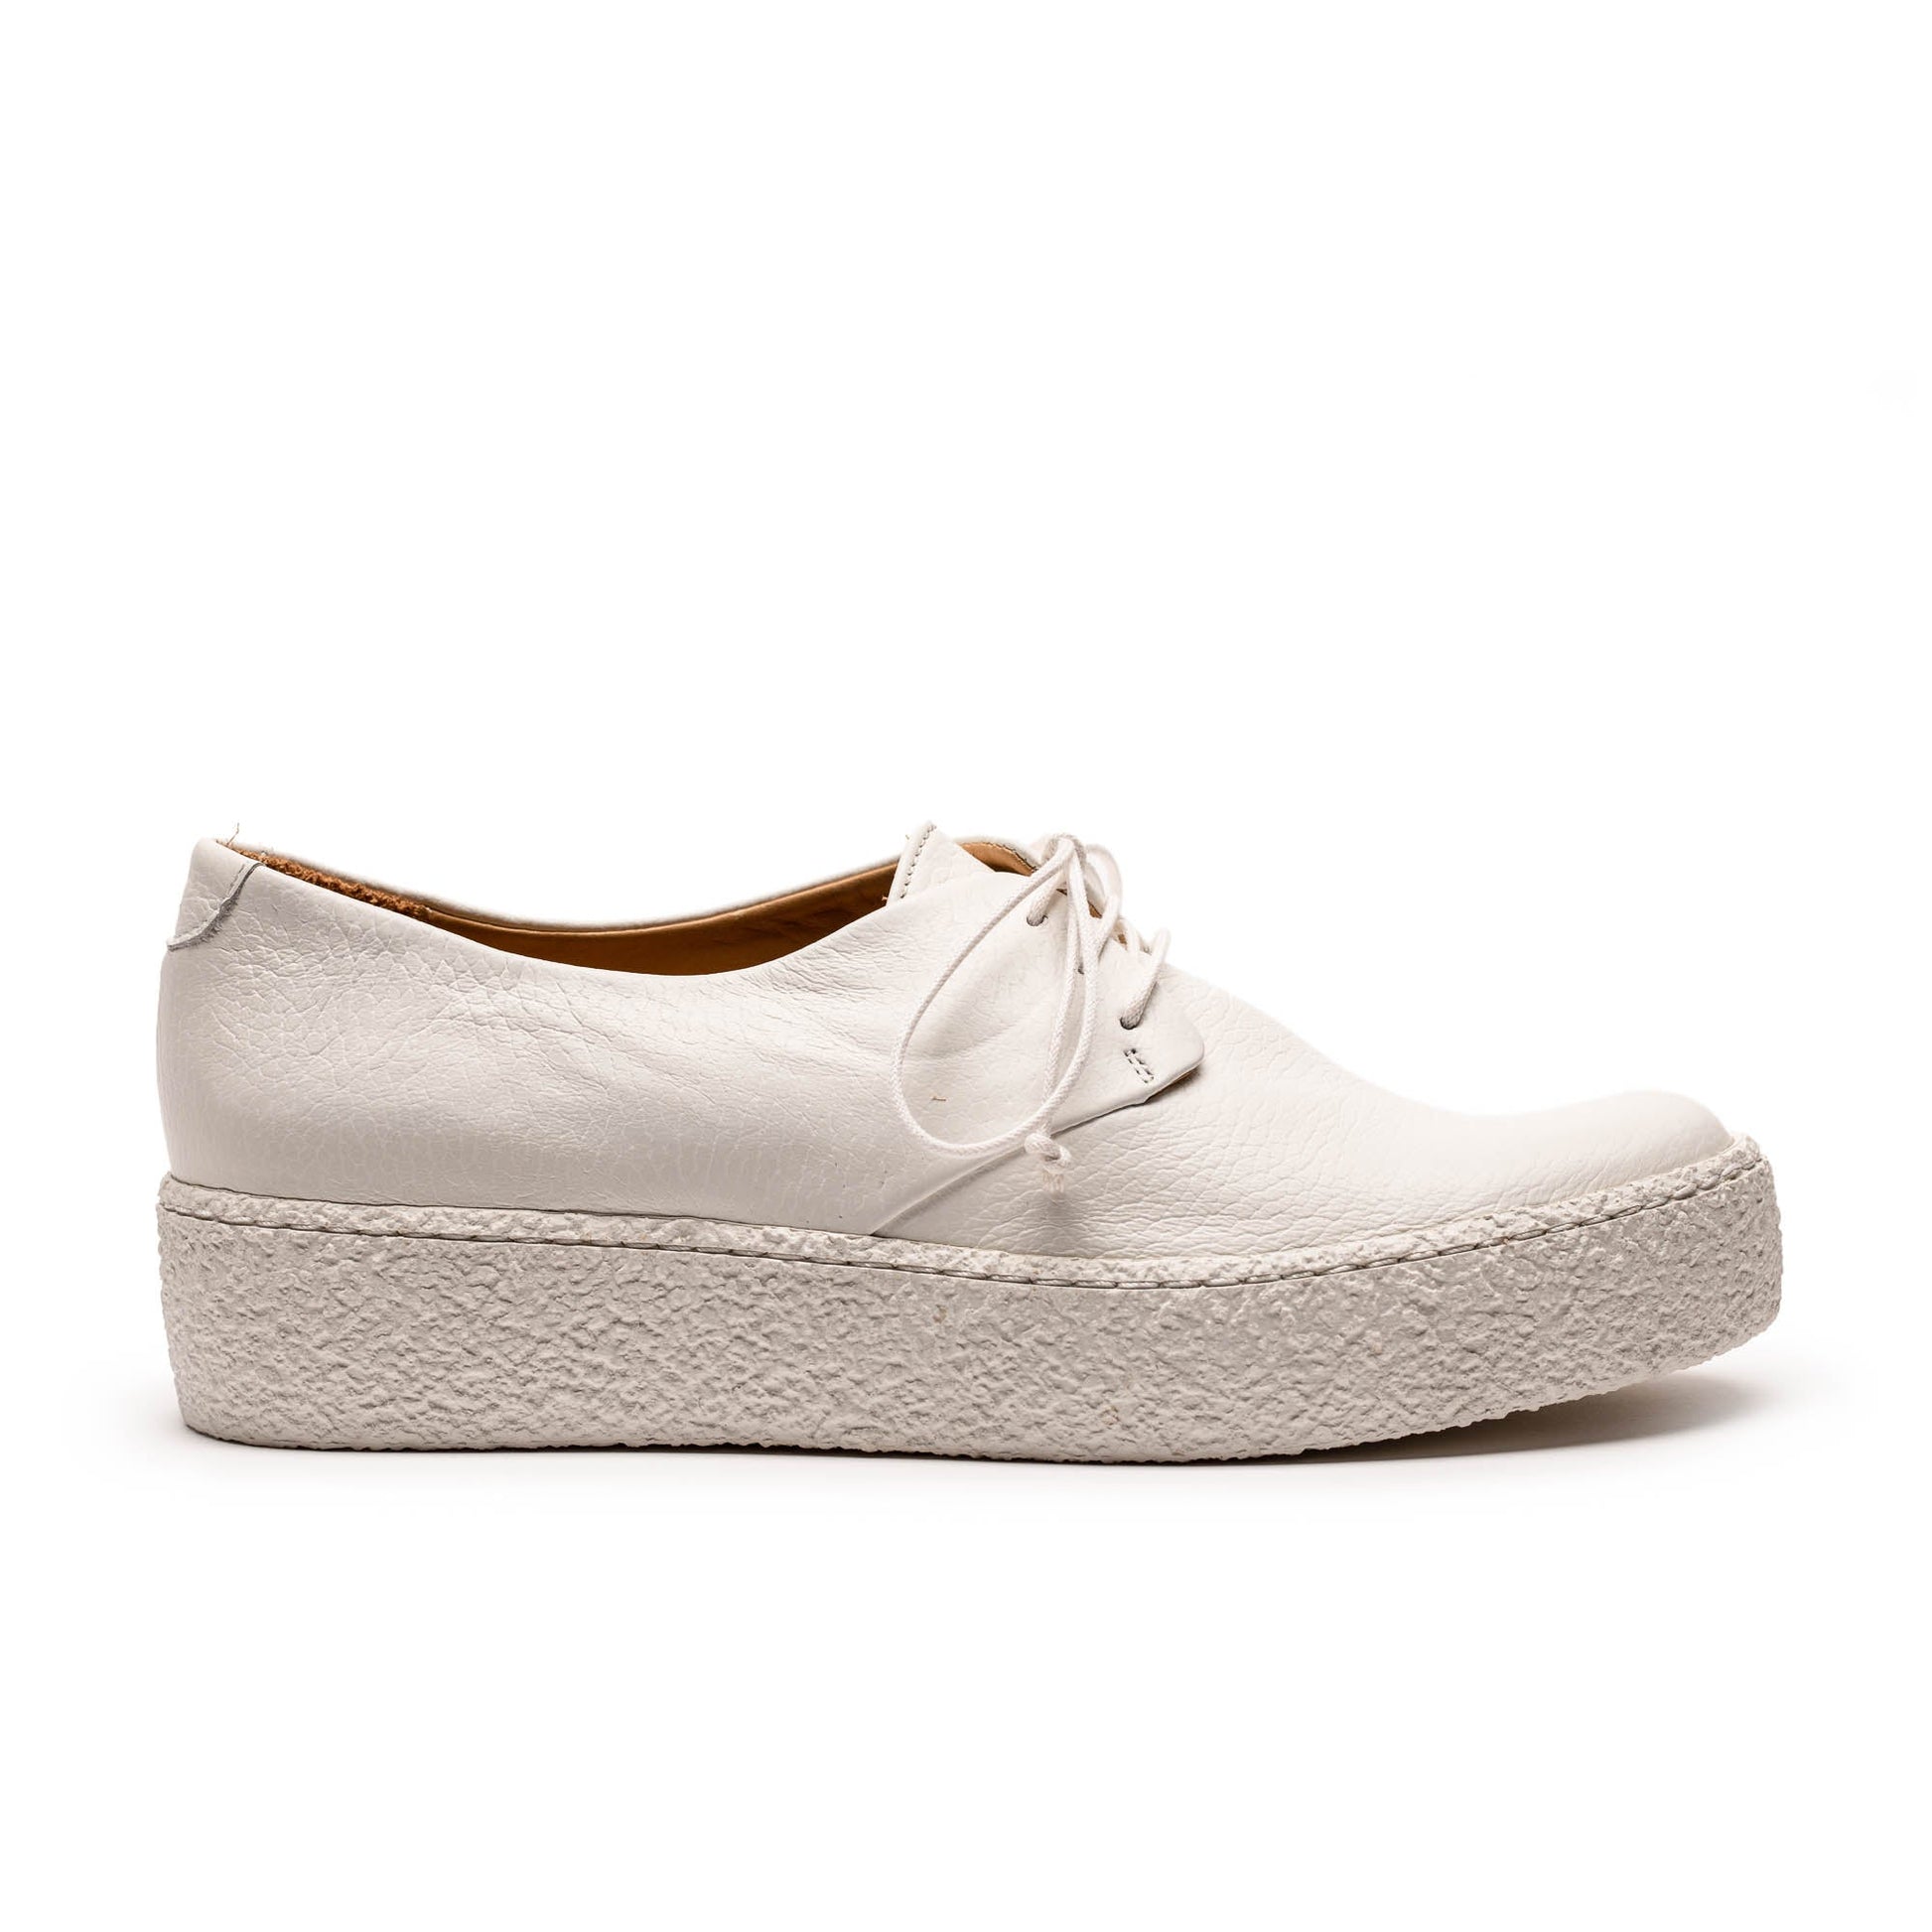 white leather platform sneaker designed by tracey neuls